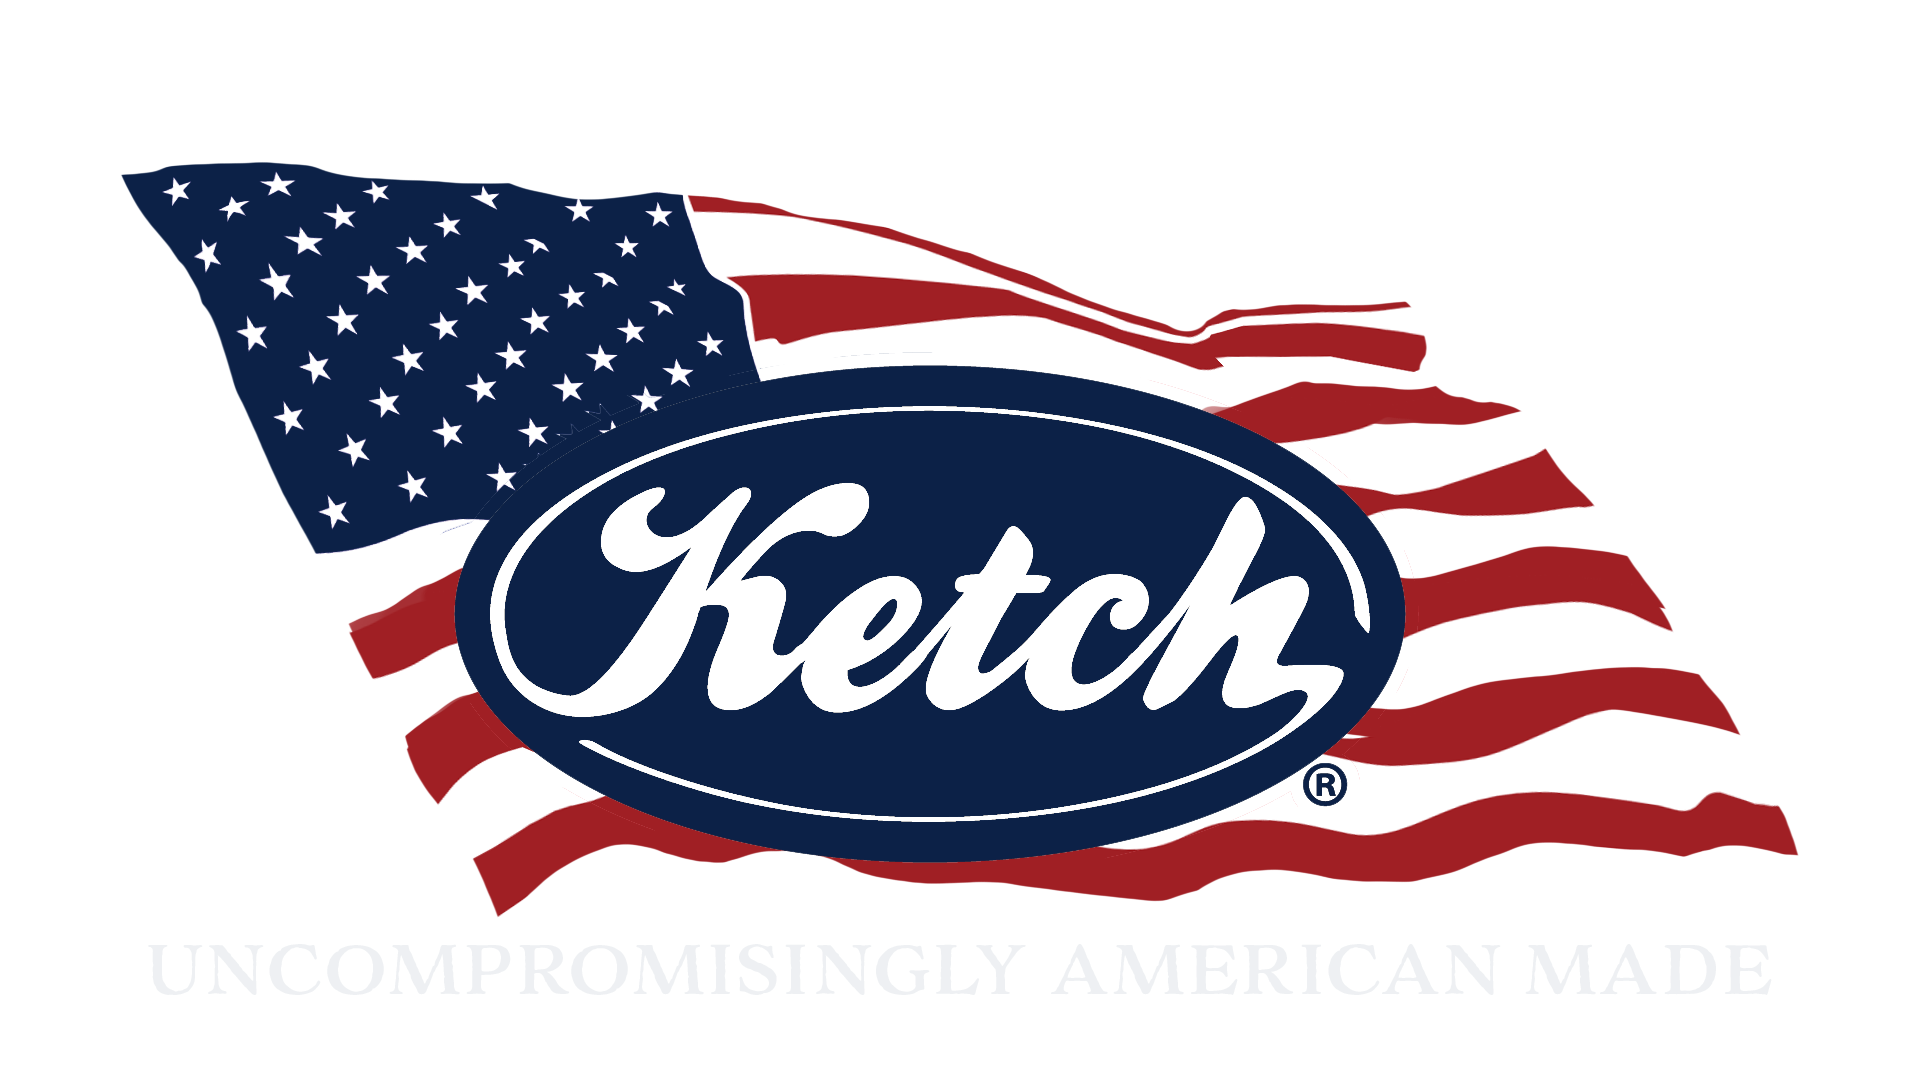 Ketch Logo in front of United States Flag. Ketch Products are uncompromisingly made in the USA.